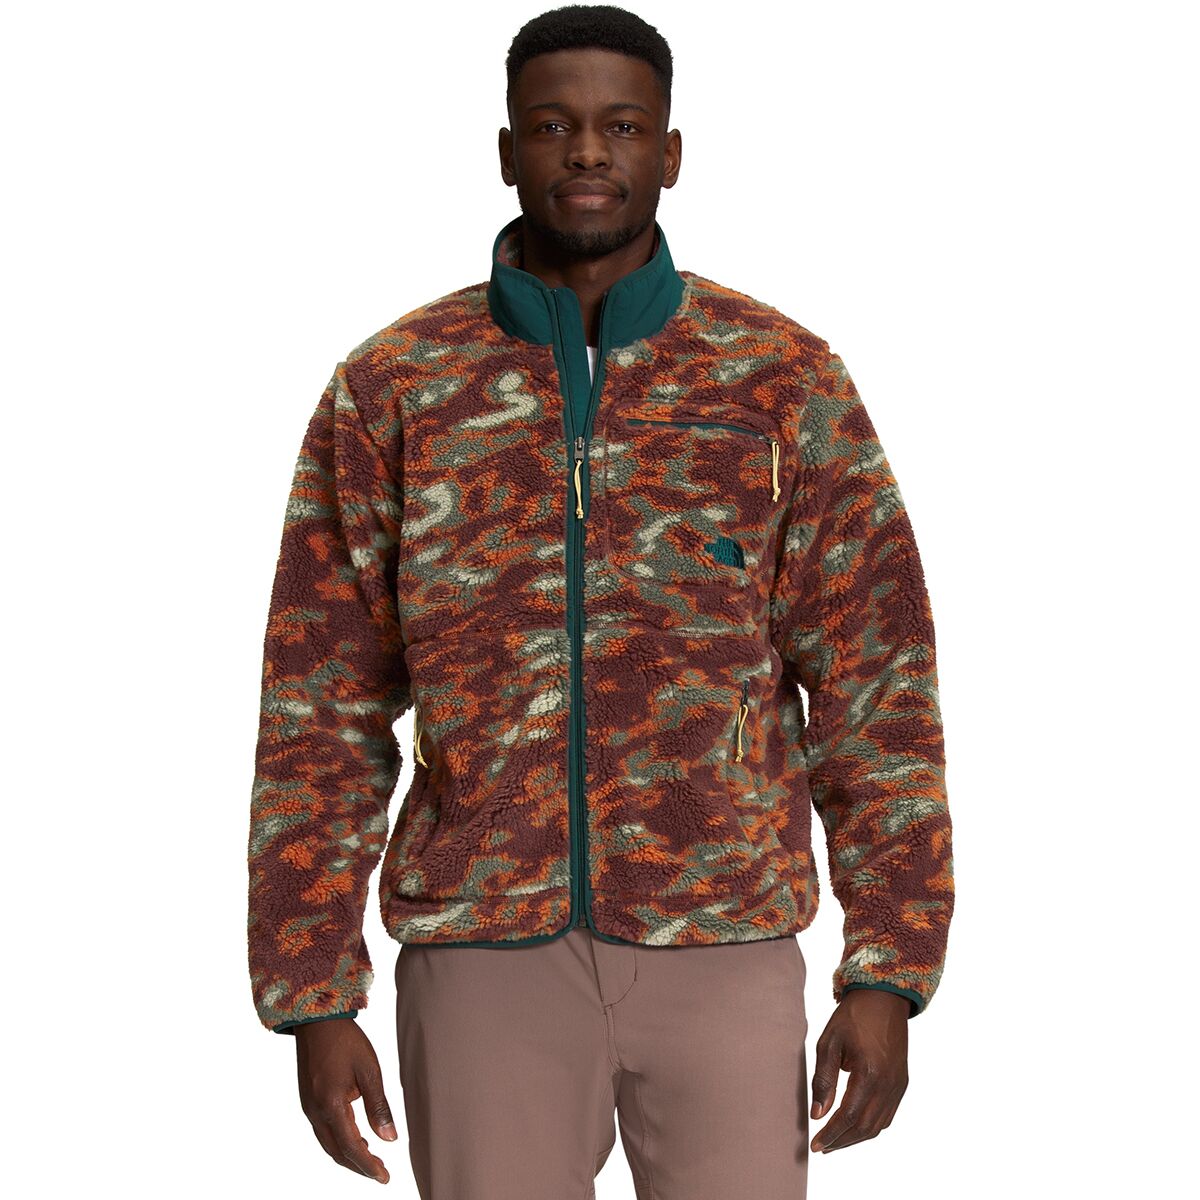 The North Face Extreme Pile Full Zip Jacket in Tan Jacquard print-Brown